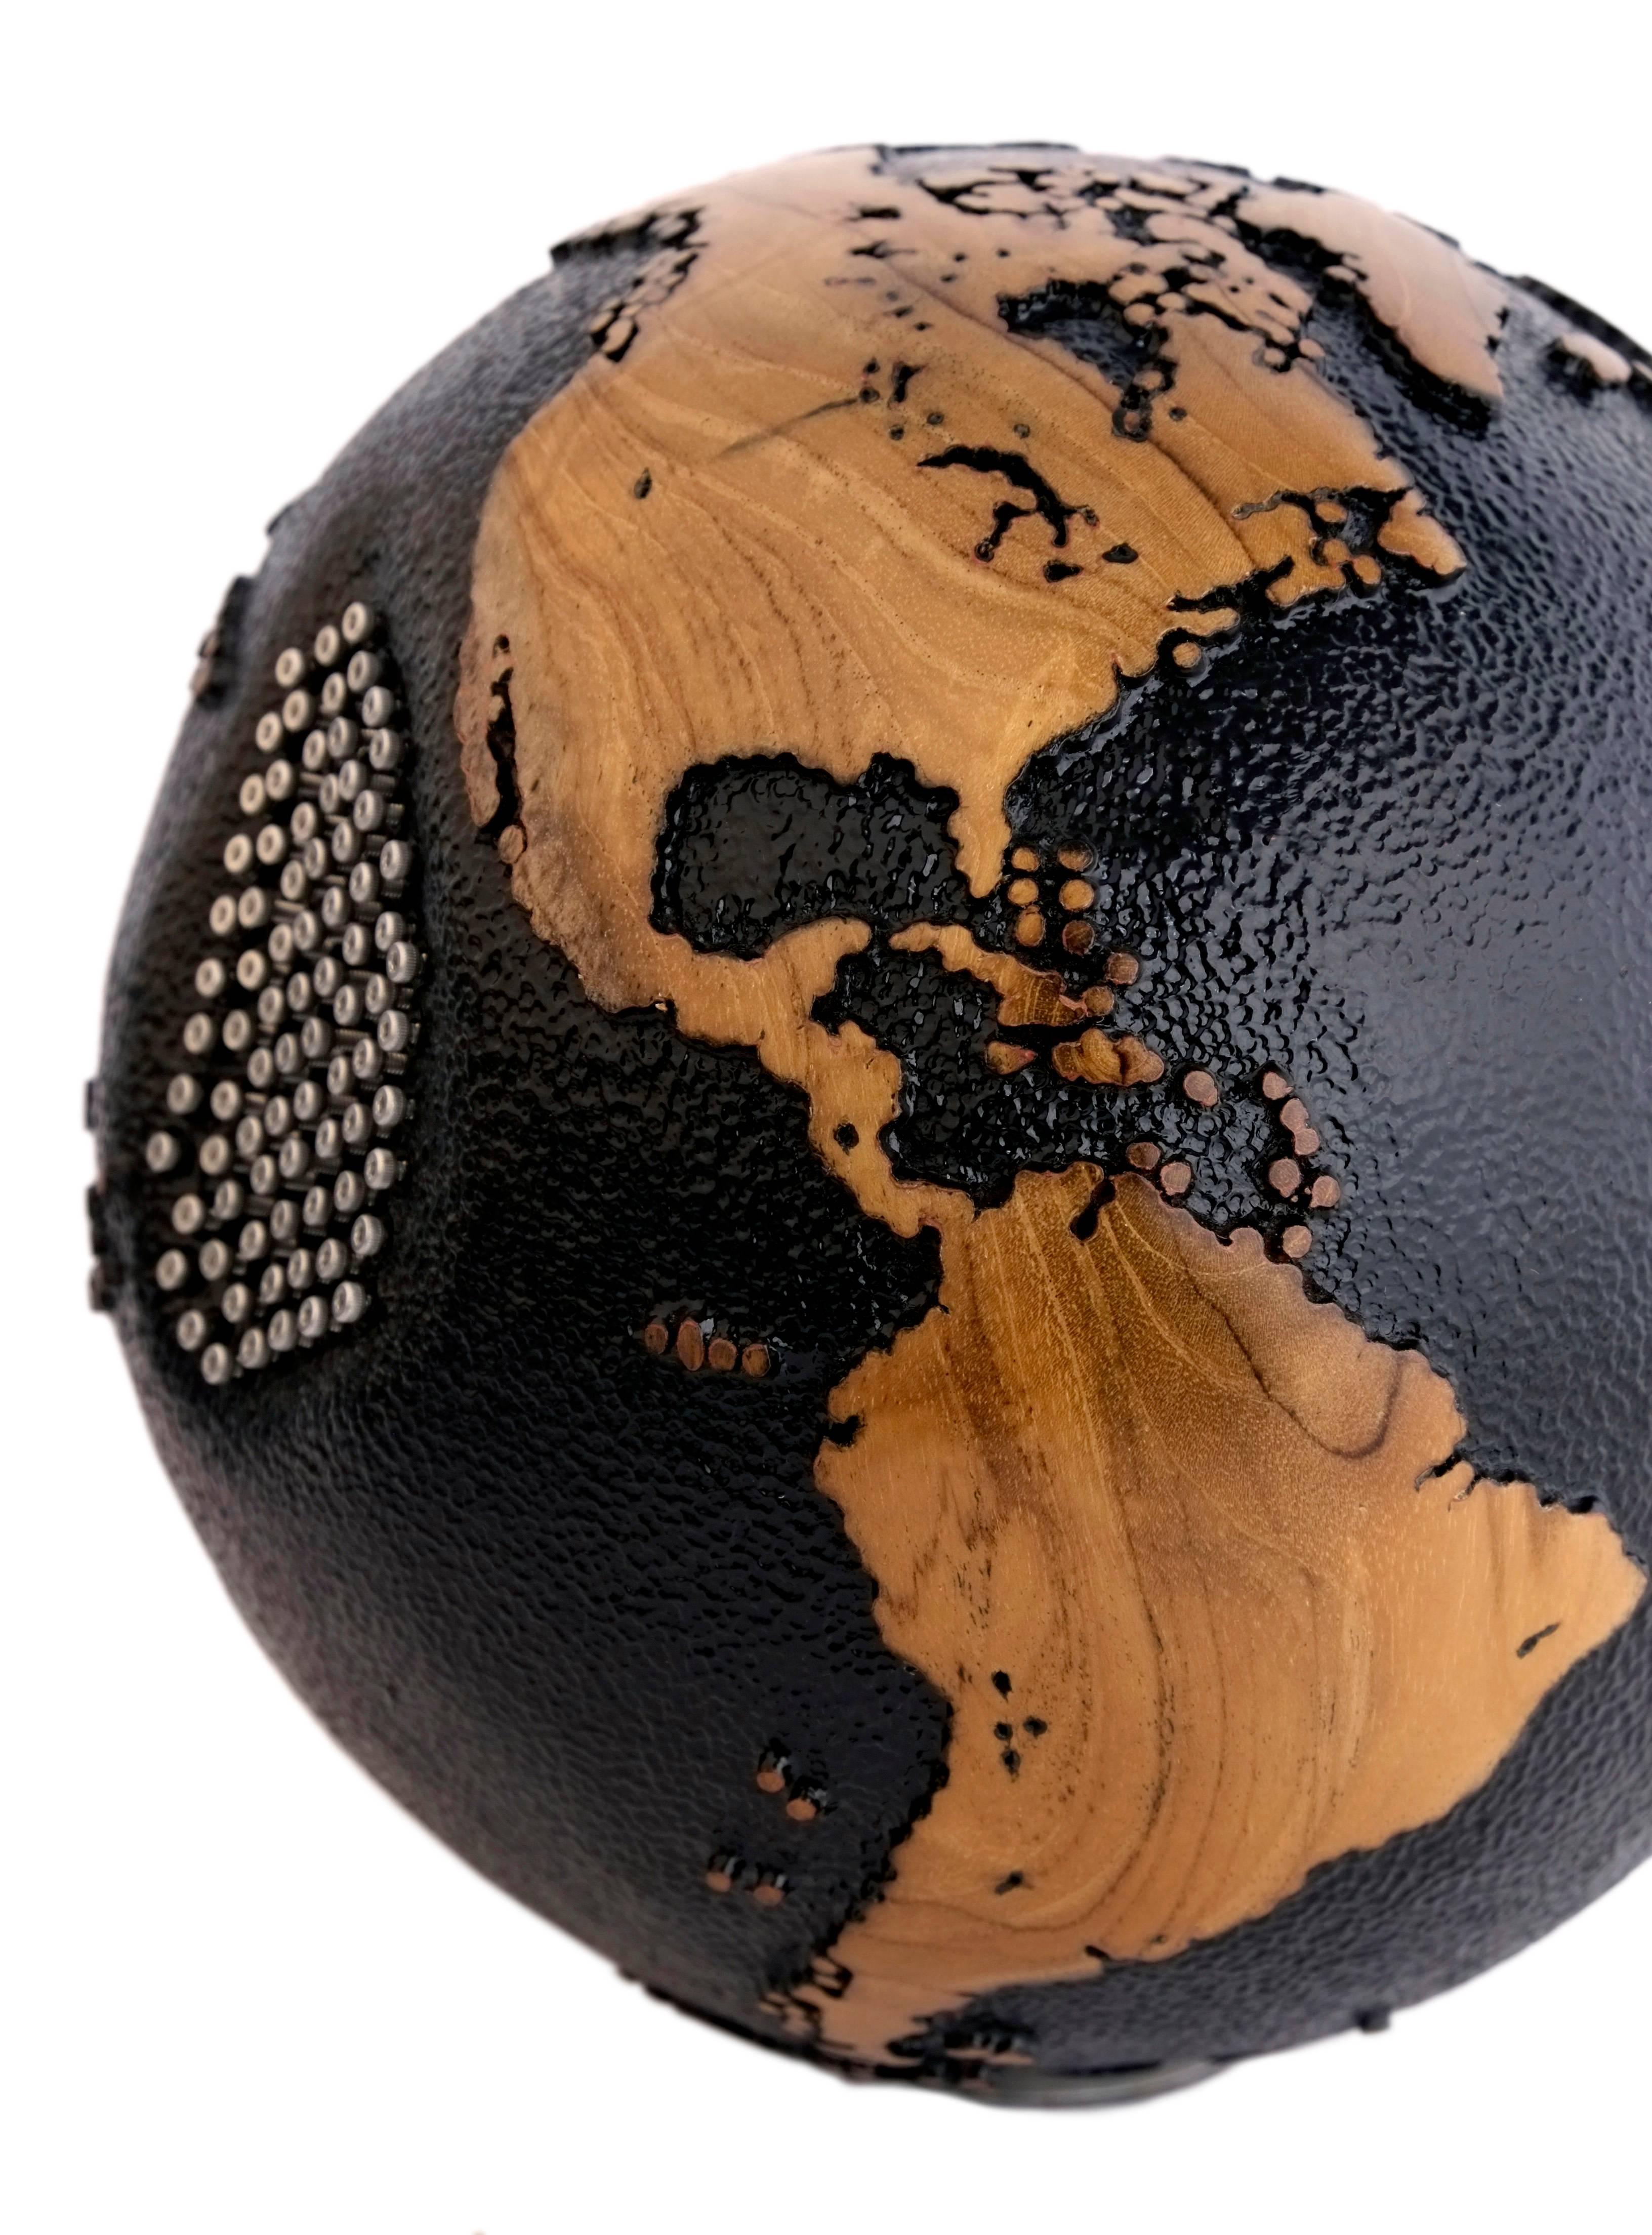 Balinese Superb Black Beauty Wooden Globe with 79 Stainless Bolts, 20 cm, Saturday Sale For Sale